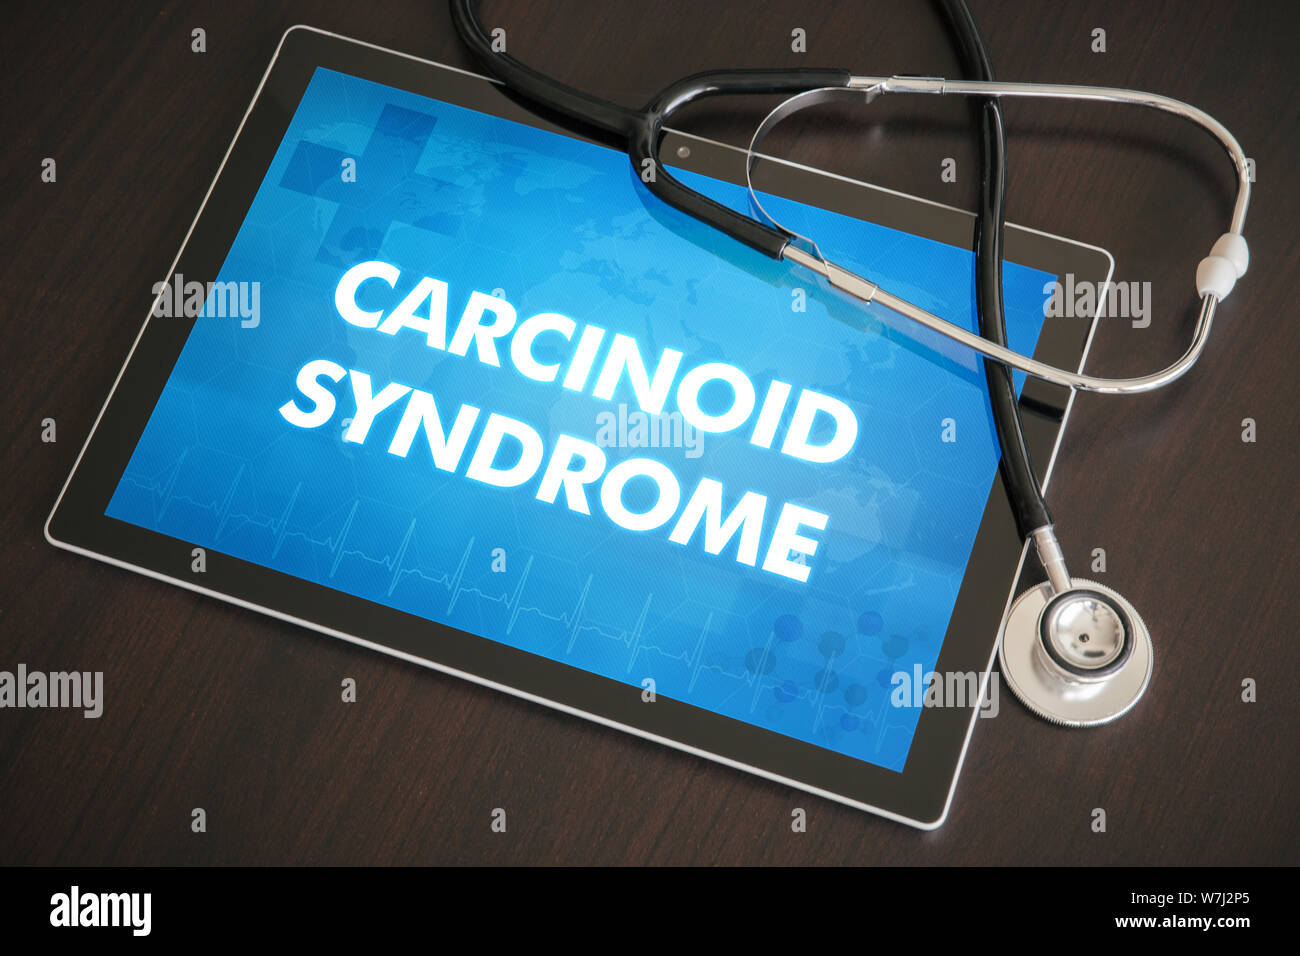 Carcinoid syndrome (endocrine disease) diagnosis medical concept on tablet screen with stethoscope. Stock Photo